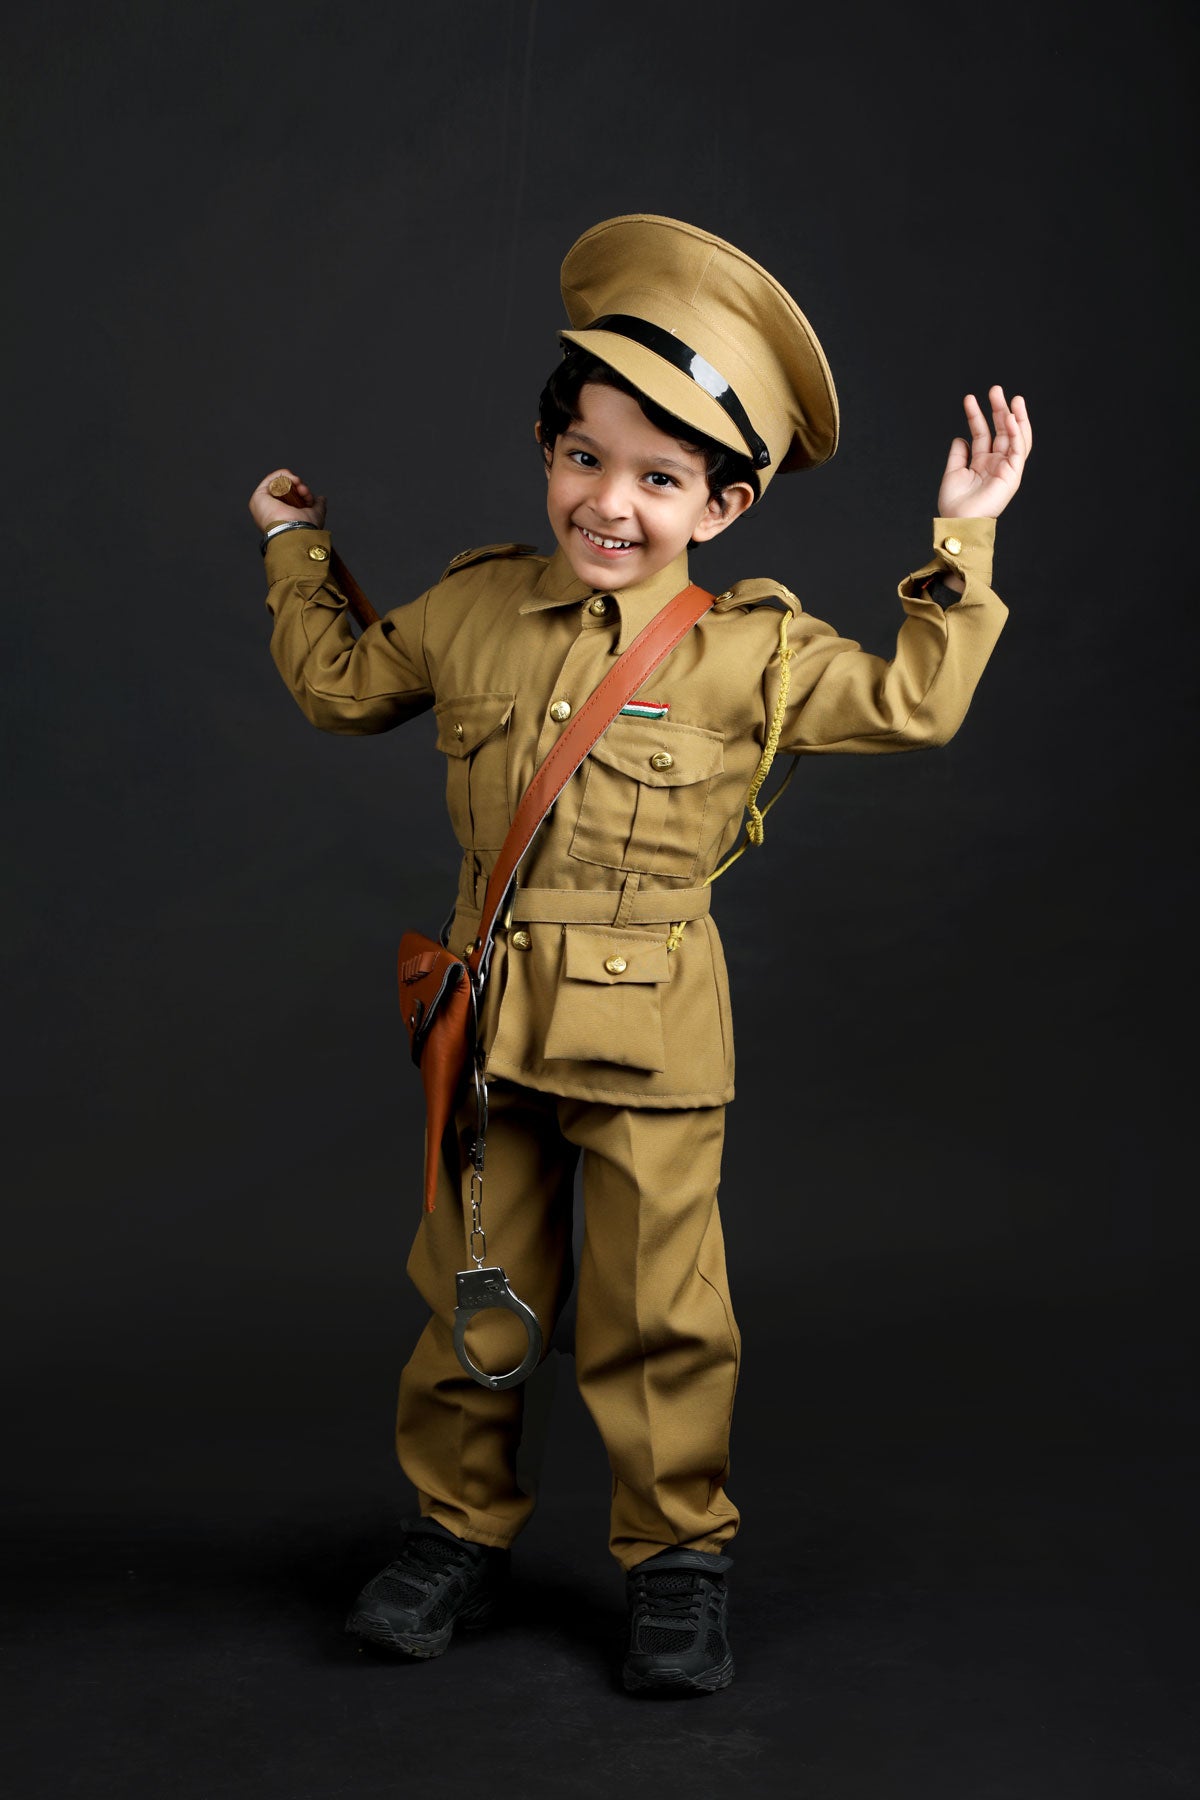 Police Dress For Kids Boys Professional Costume